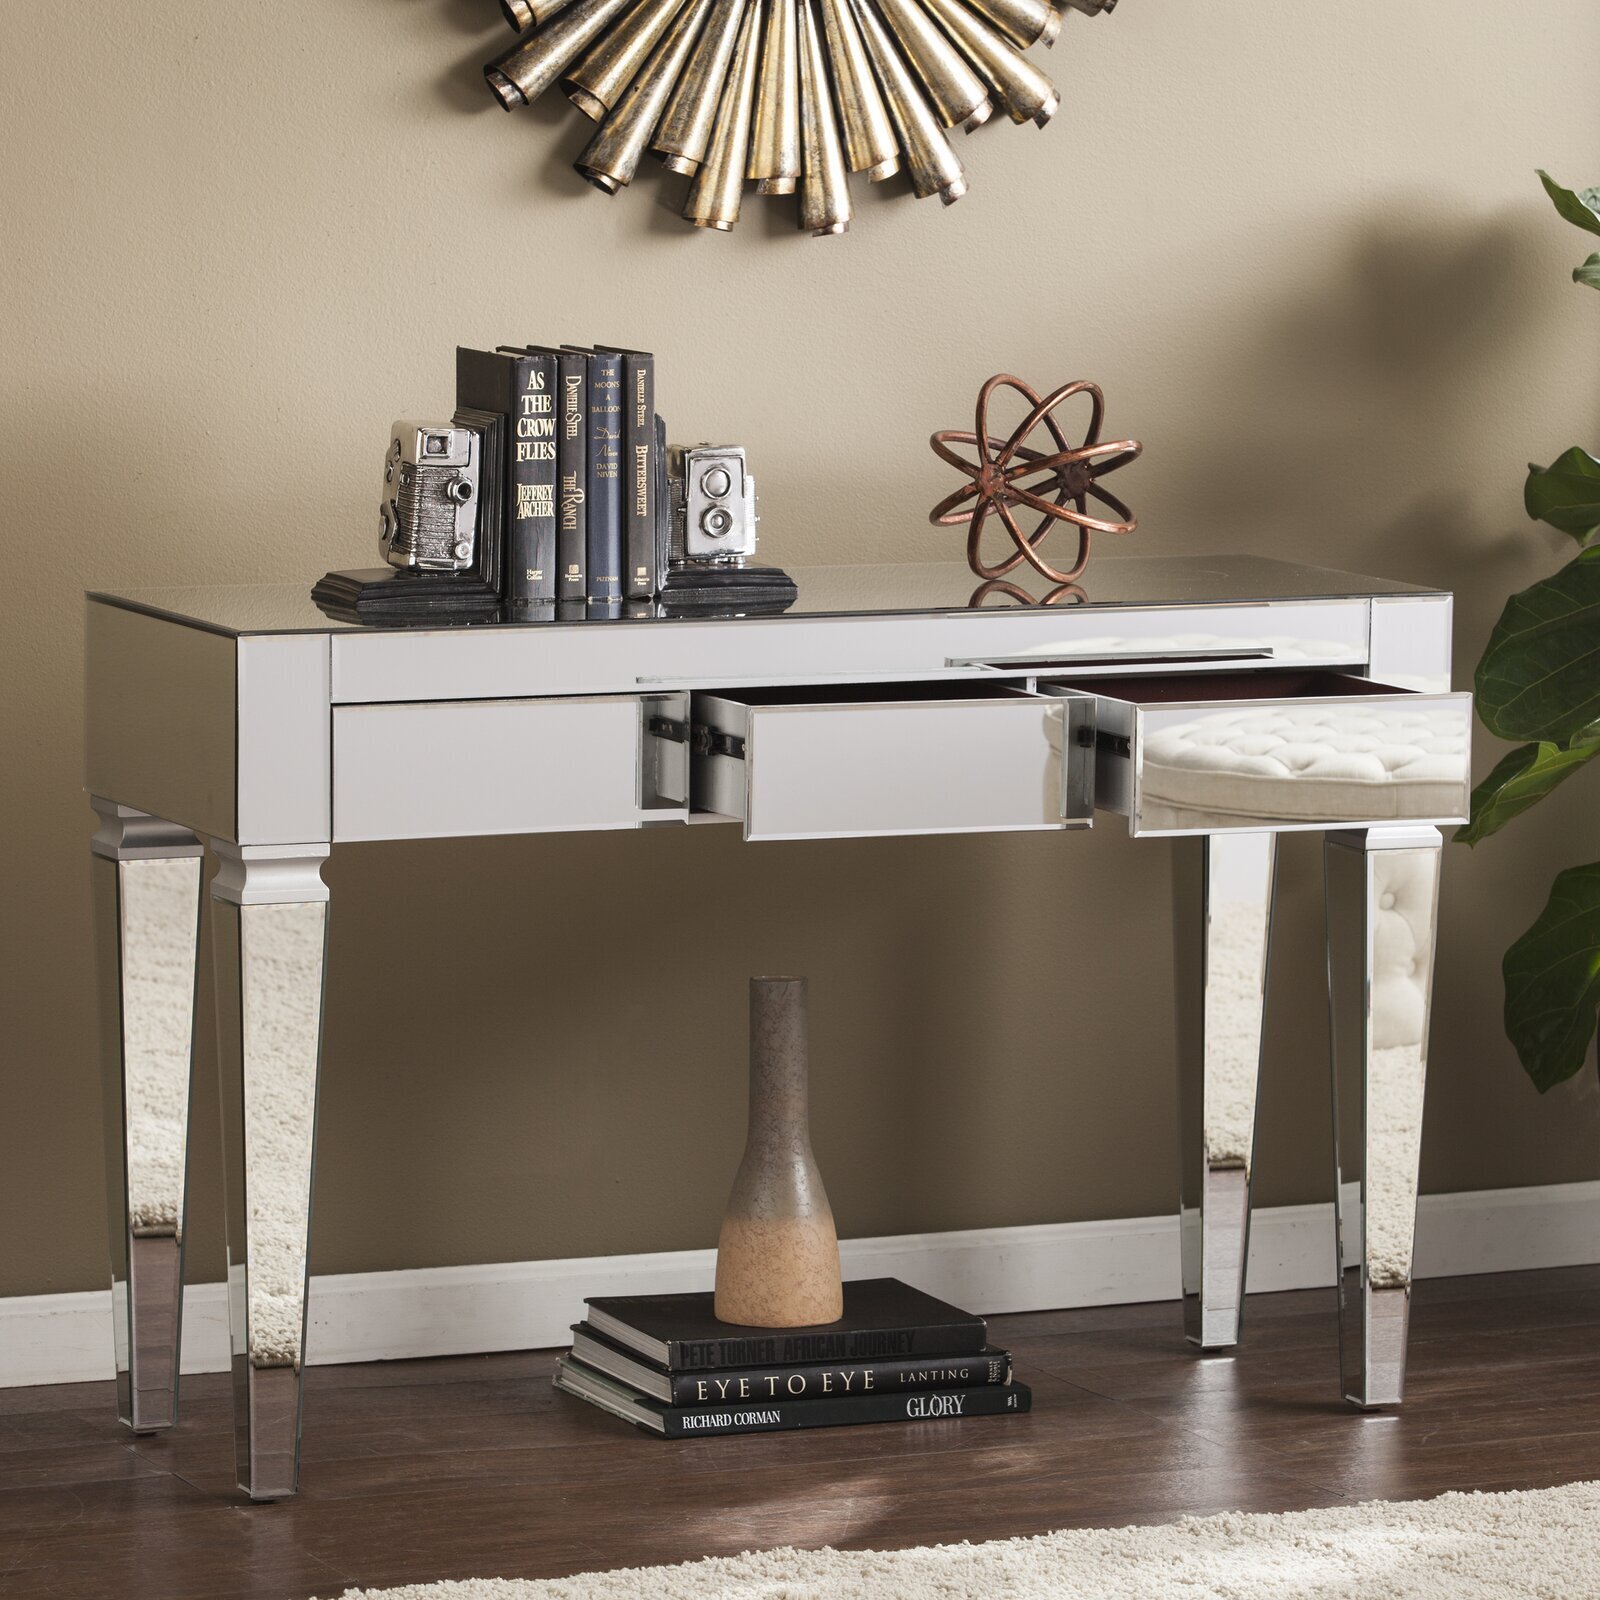 Glamorous Mirrored Console Table With Drawers 